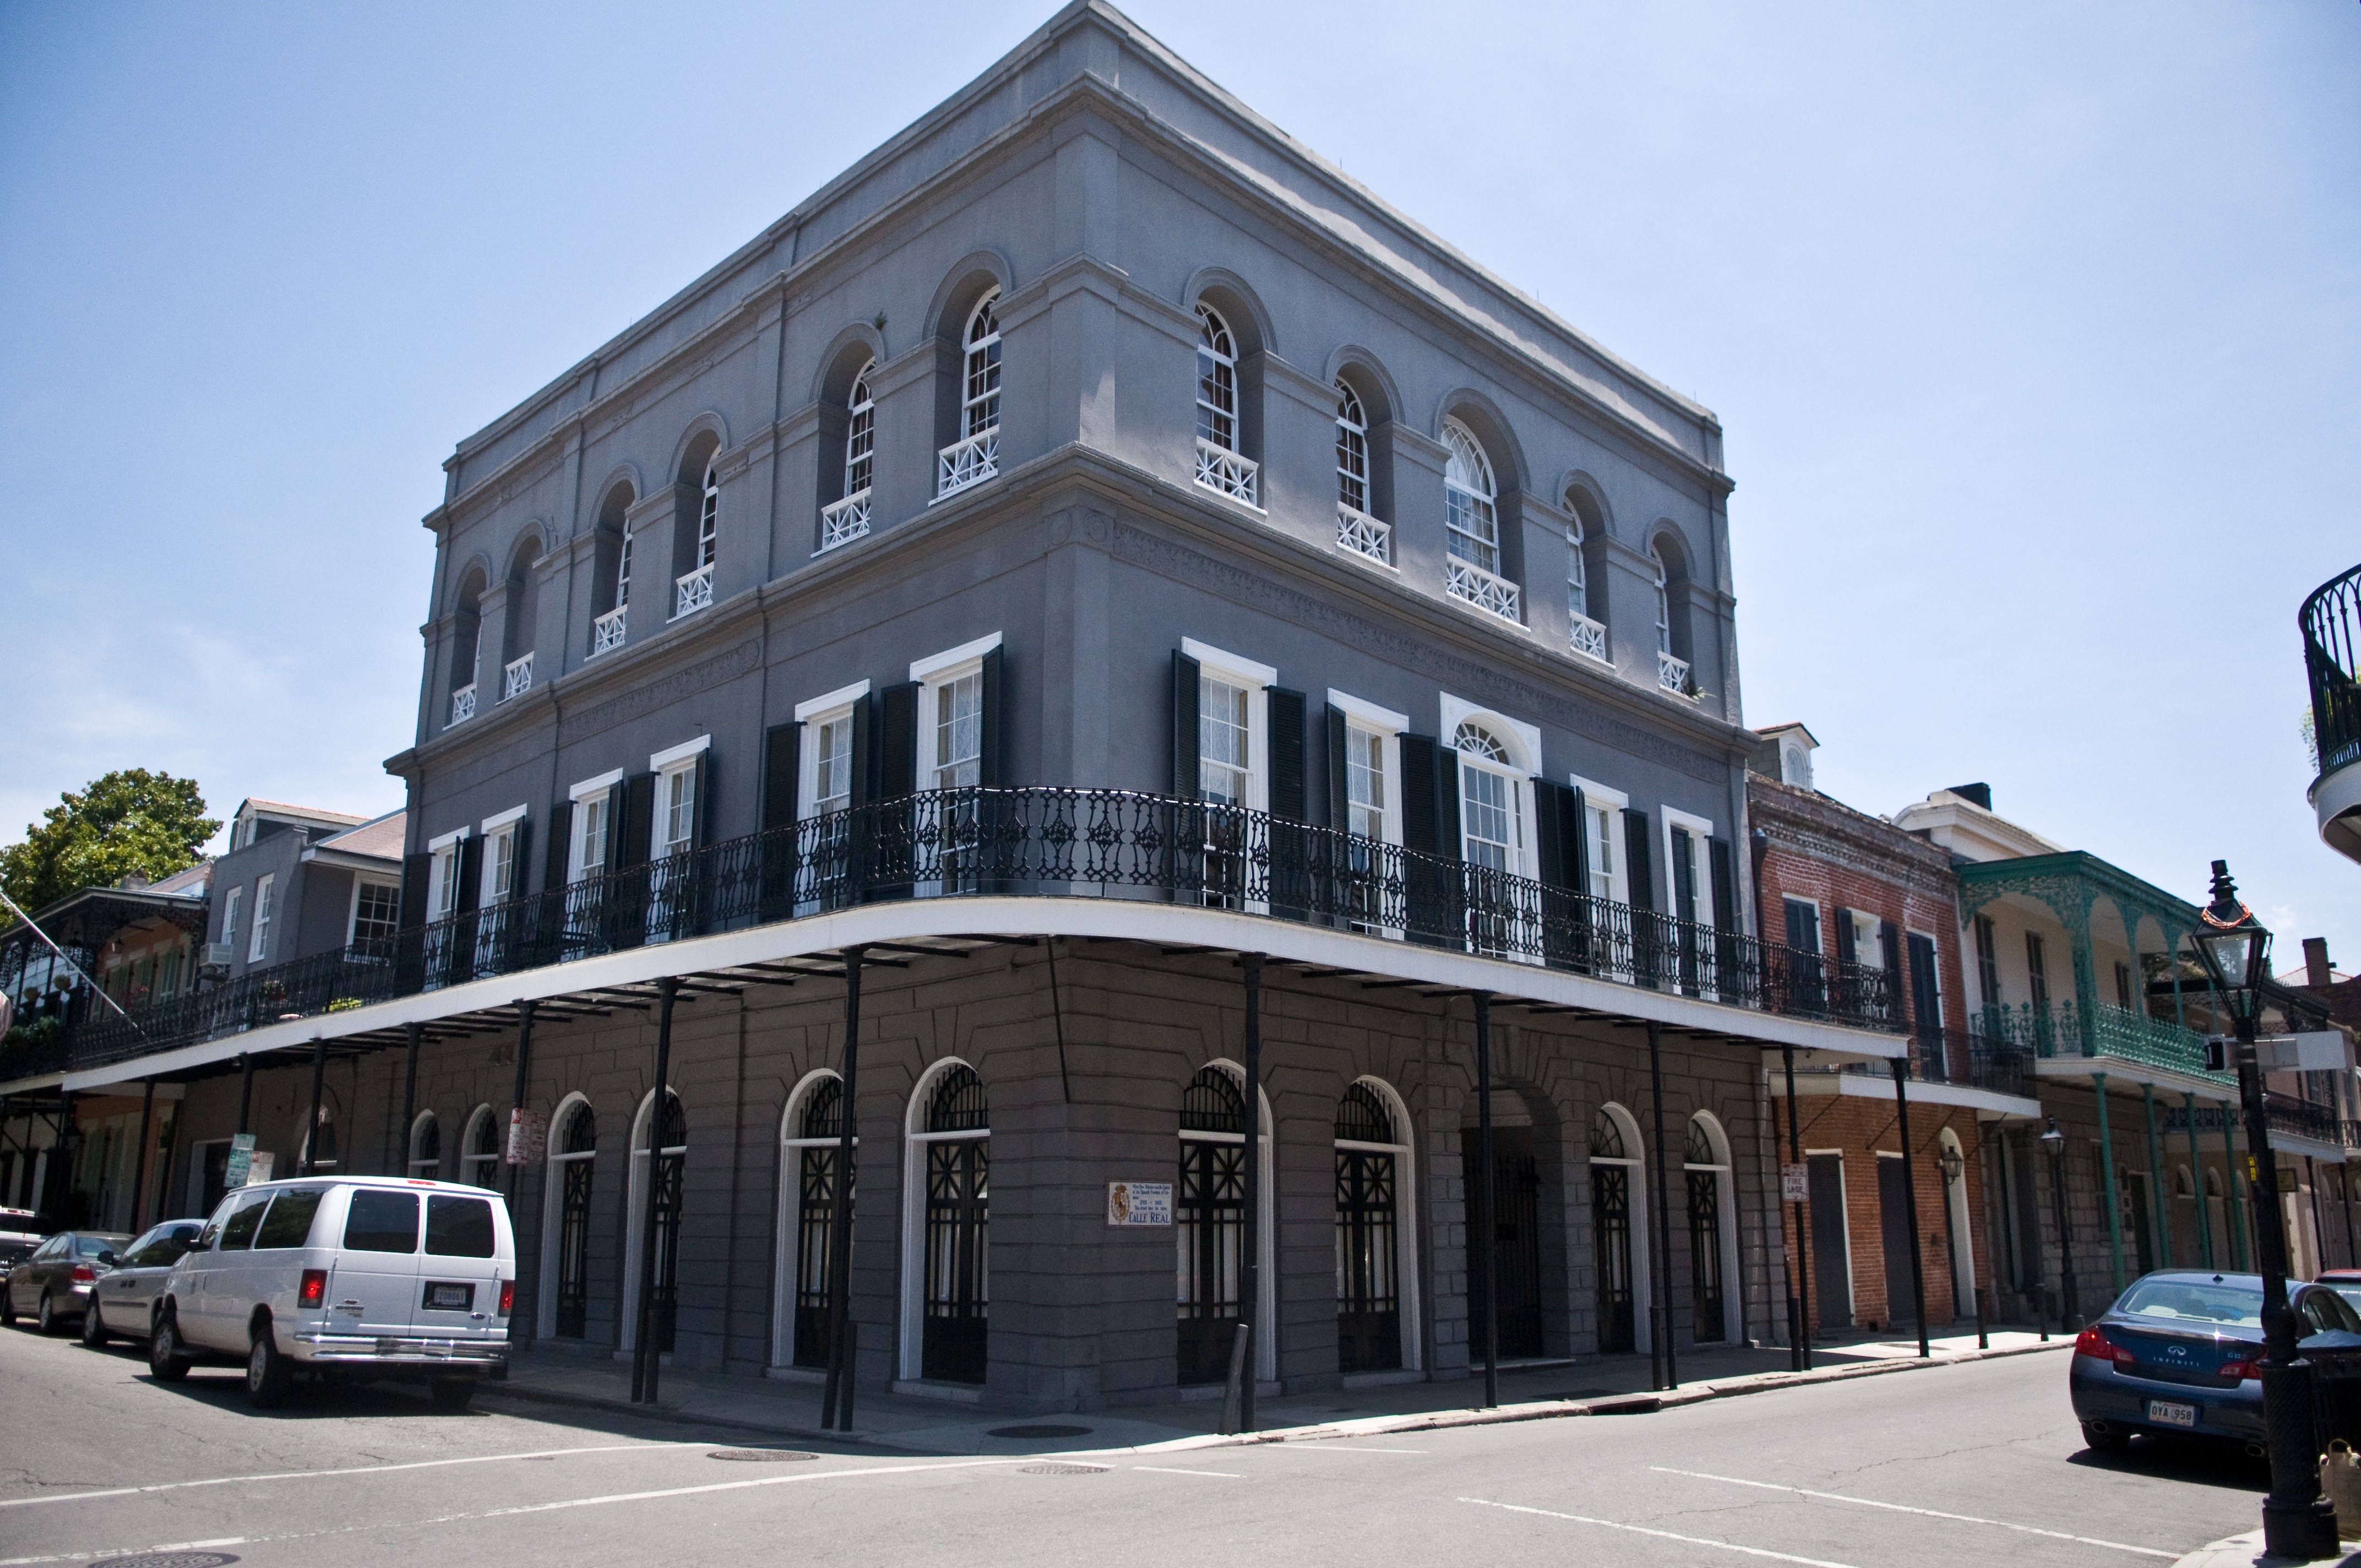 LALAURIE HOUSE